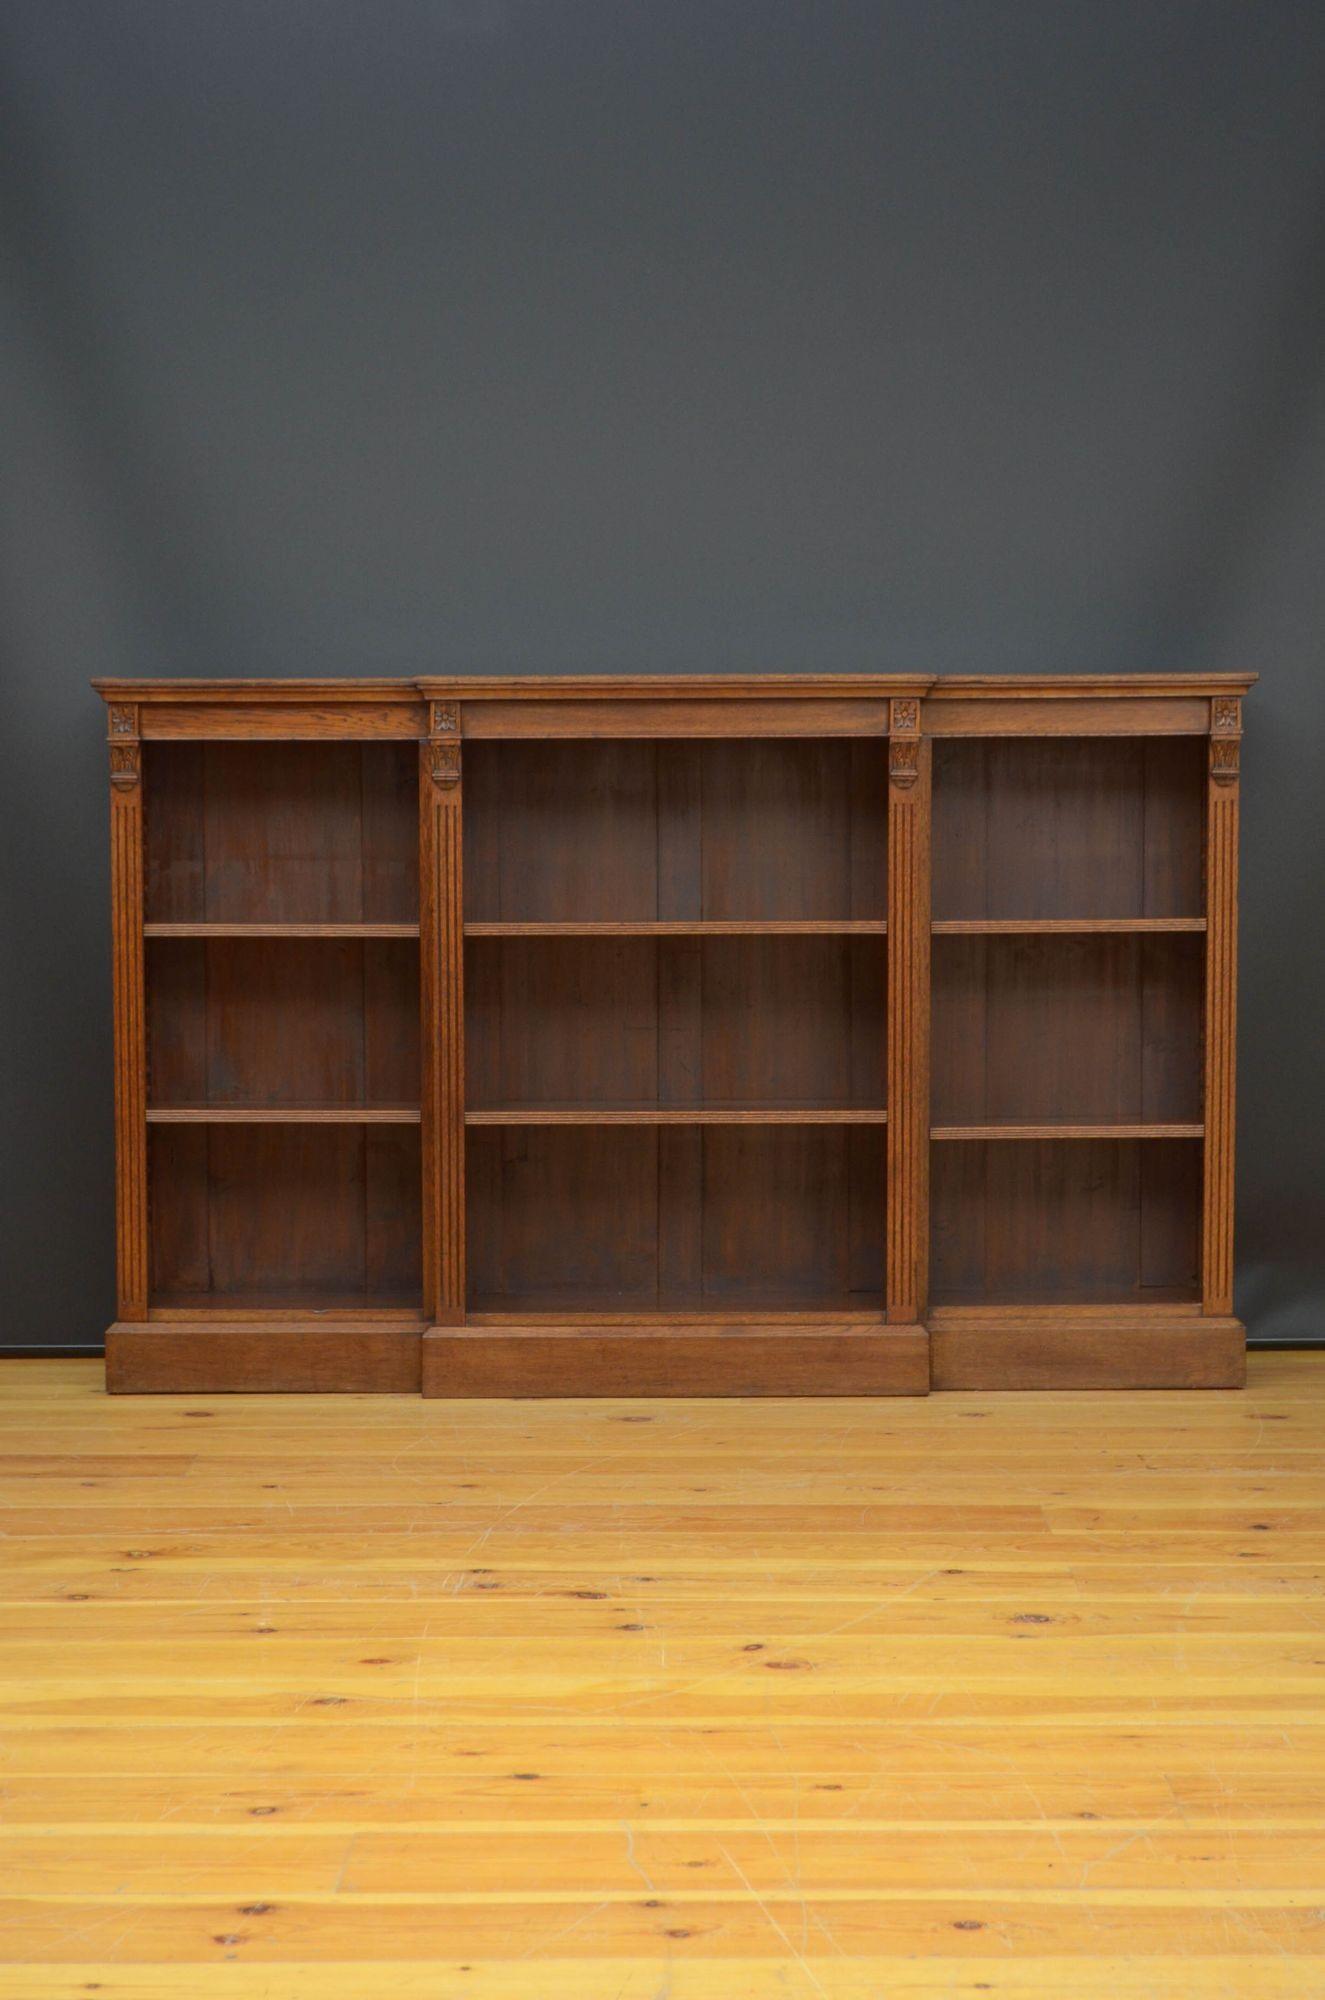 Sn5380 Late Victorian, break fronted open bookcase in oak, having oversailing top above projecting centre section and further two open sections, each with two height adjustable shelves, all standing on plinth base. This antique bookcase retains its